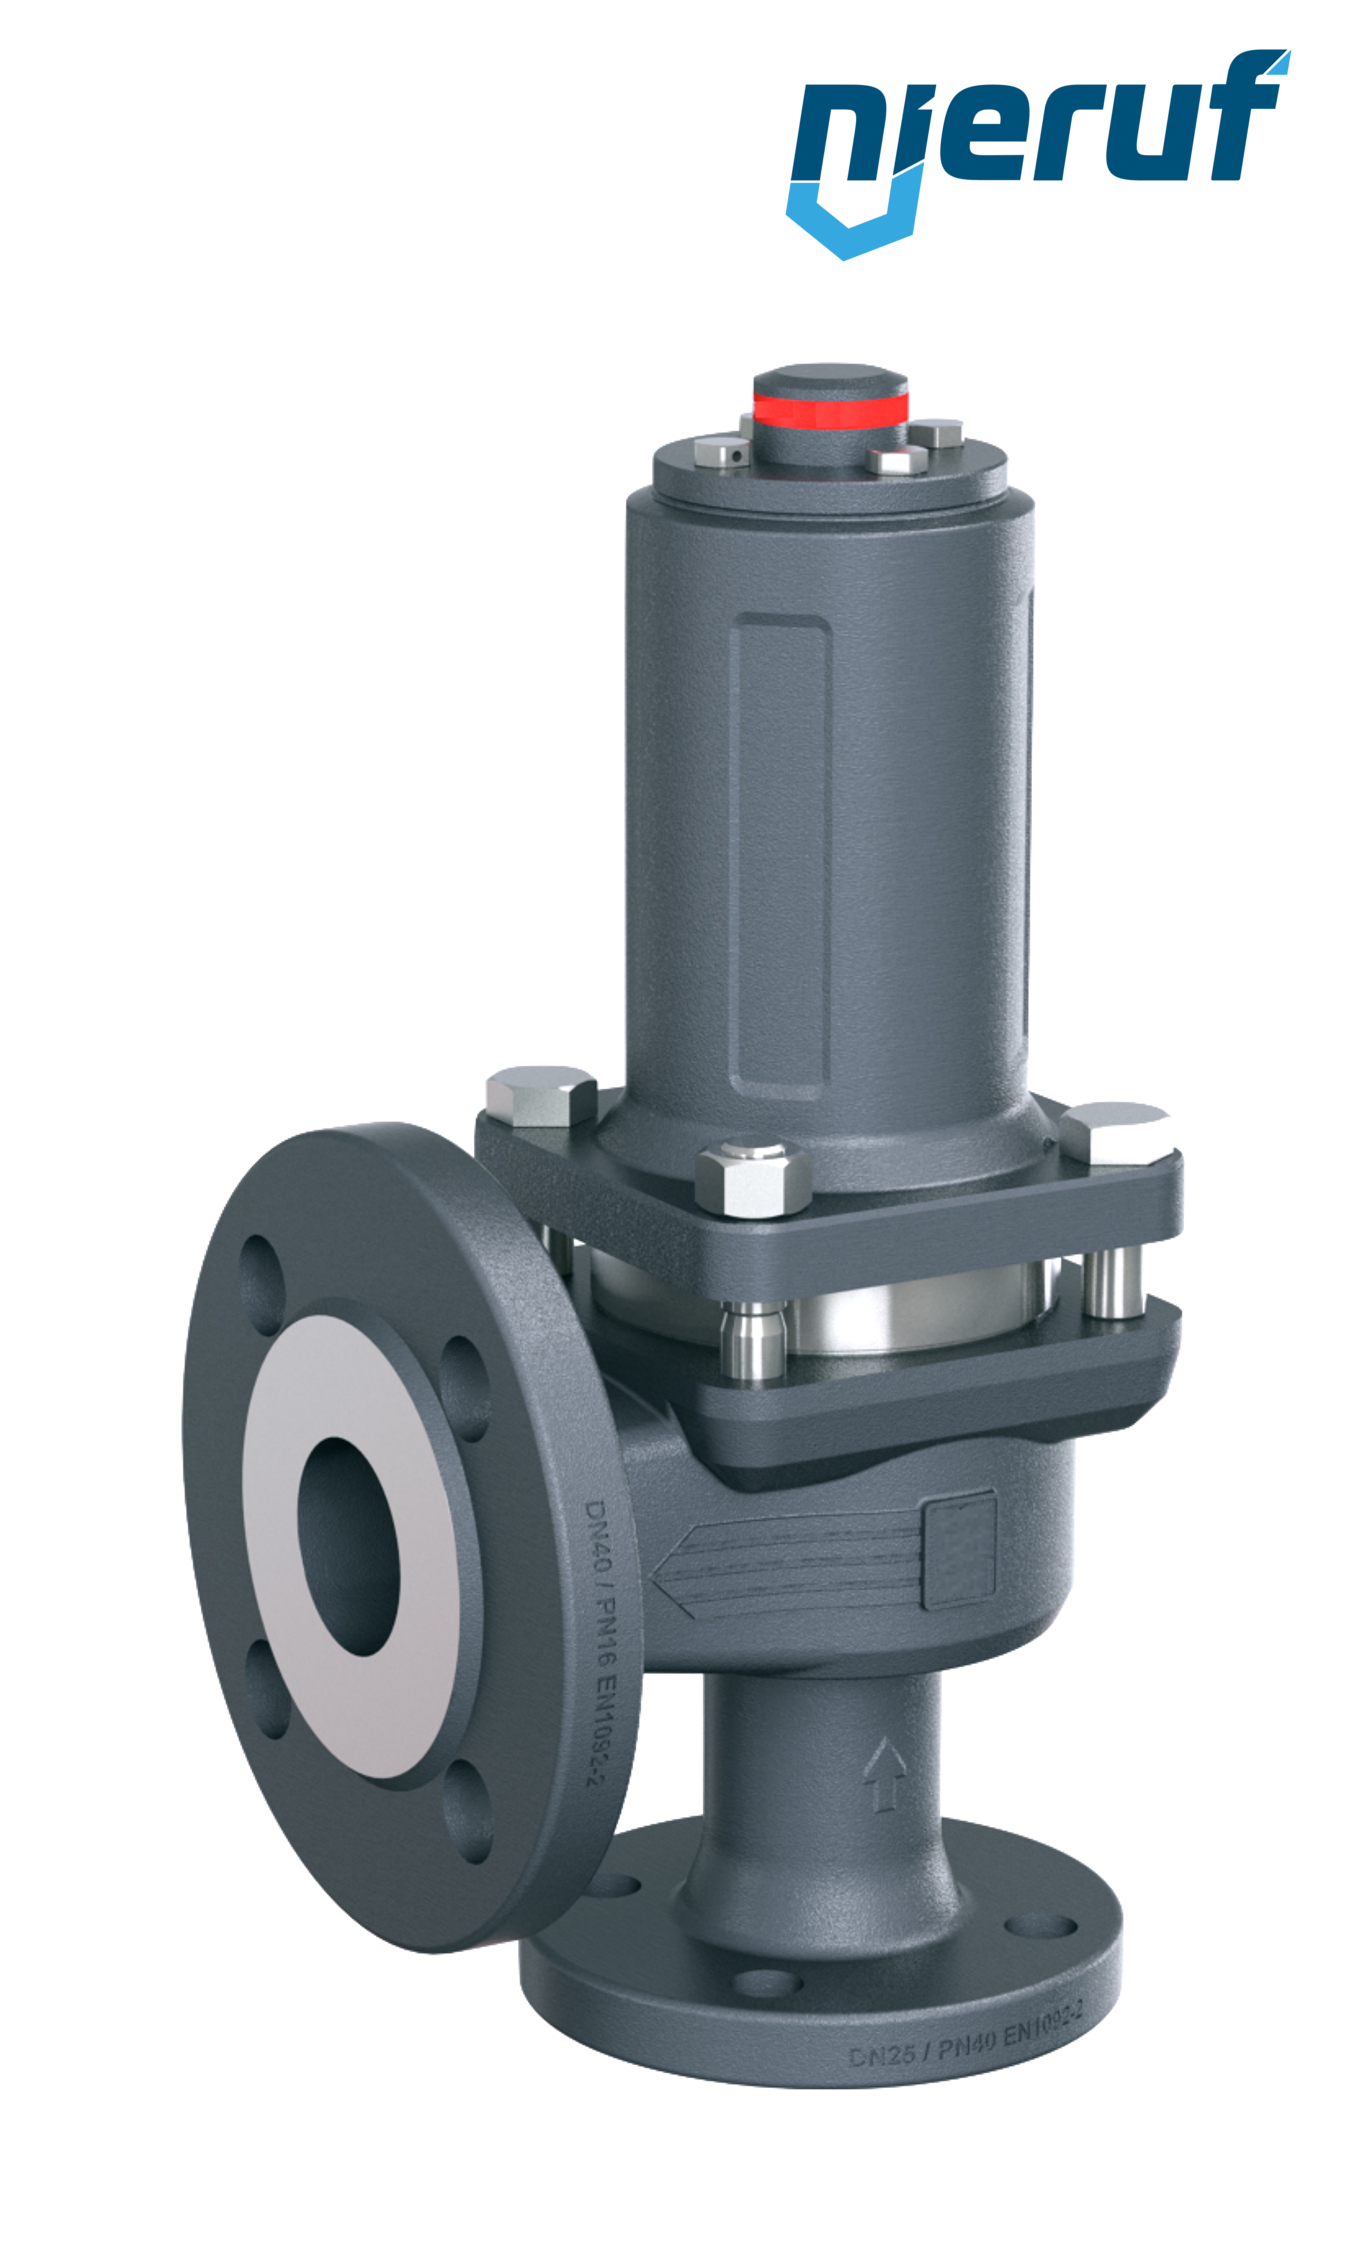 flange-safety valve DN40/DN65 SF06, gastight bonnet EPDM, without lifting device